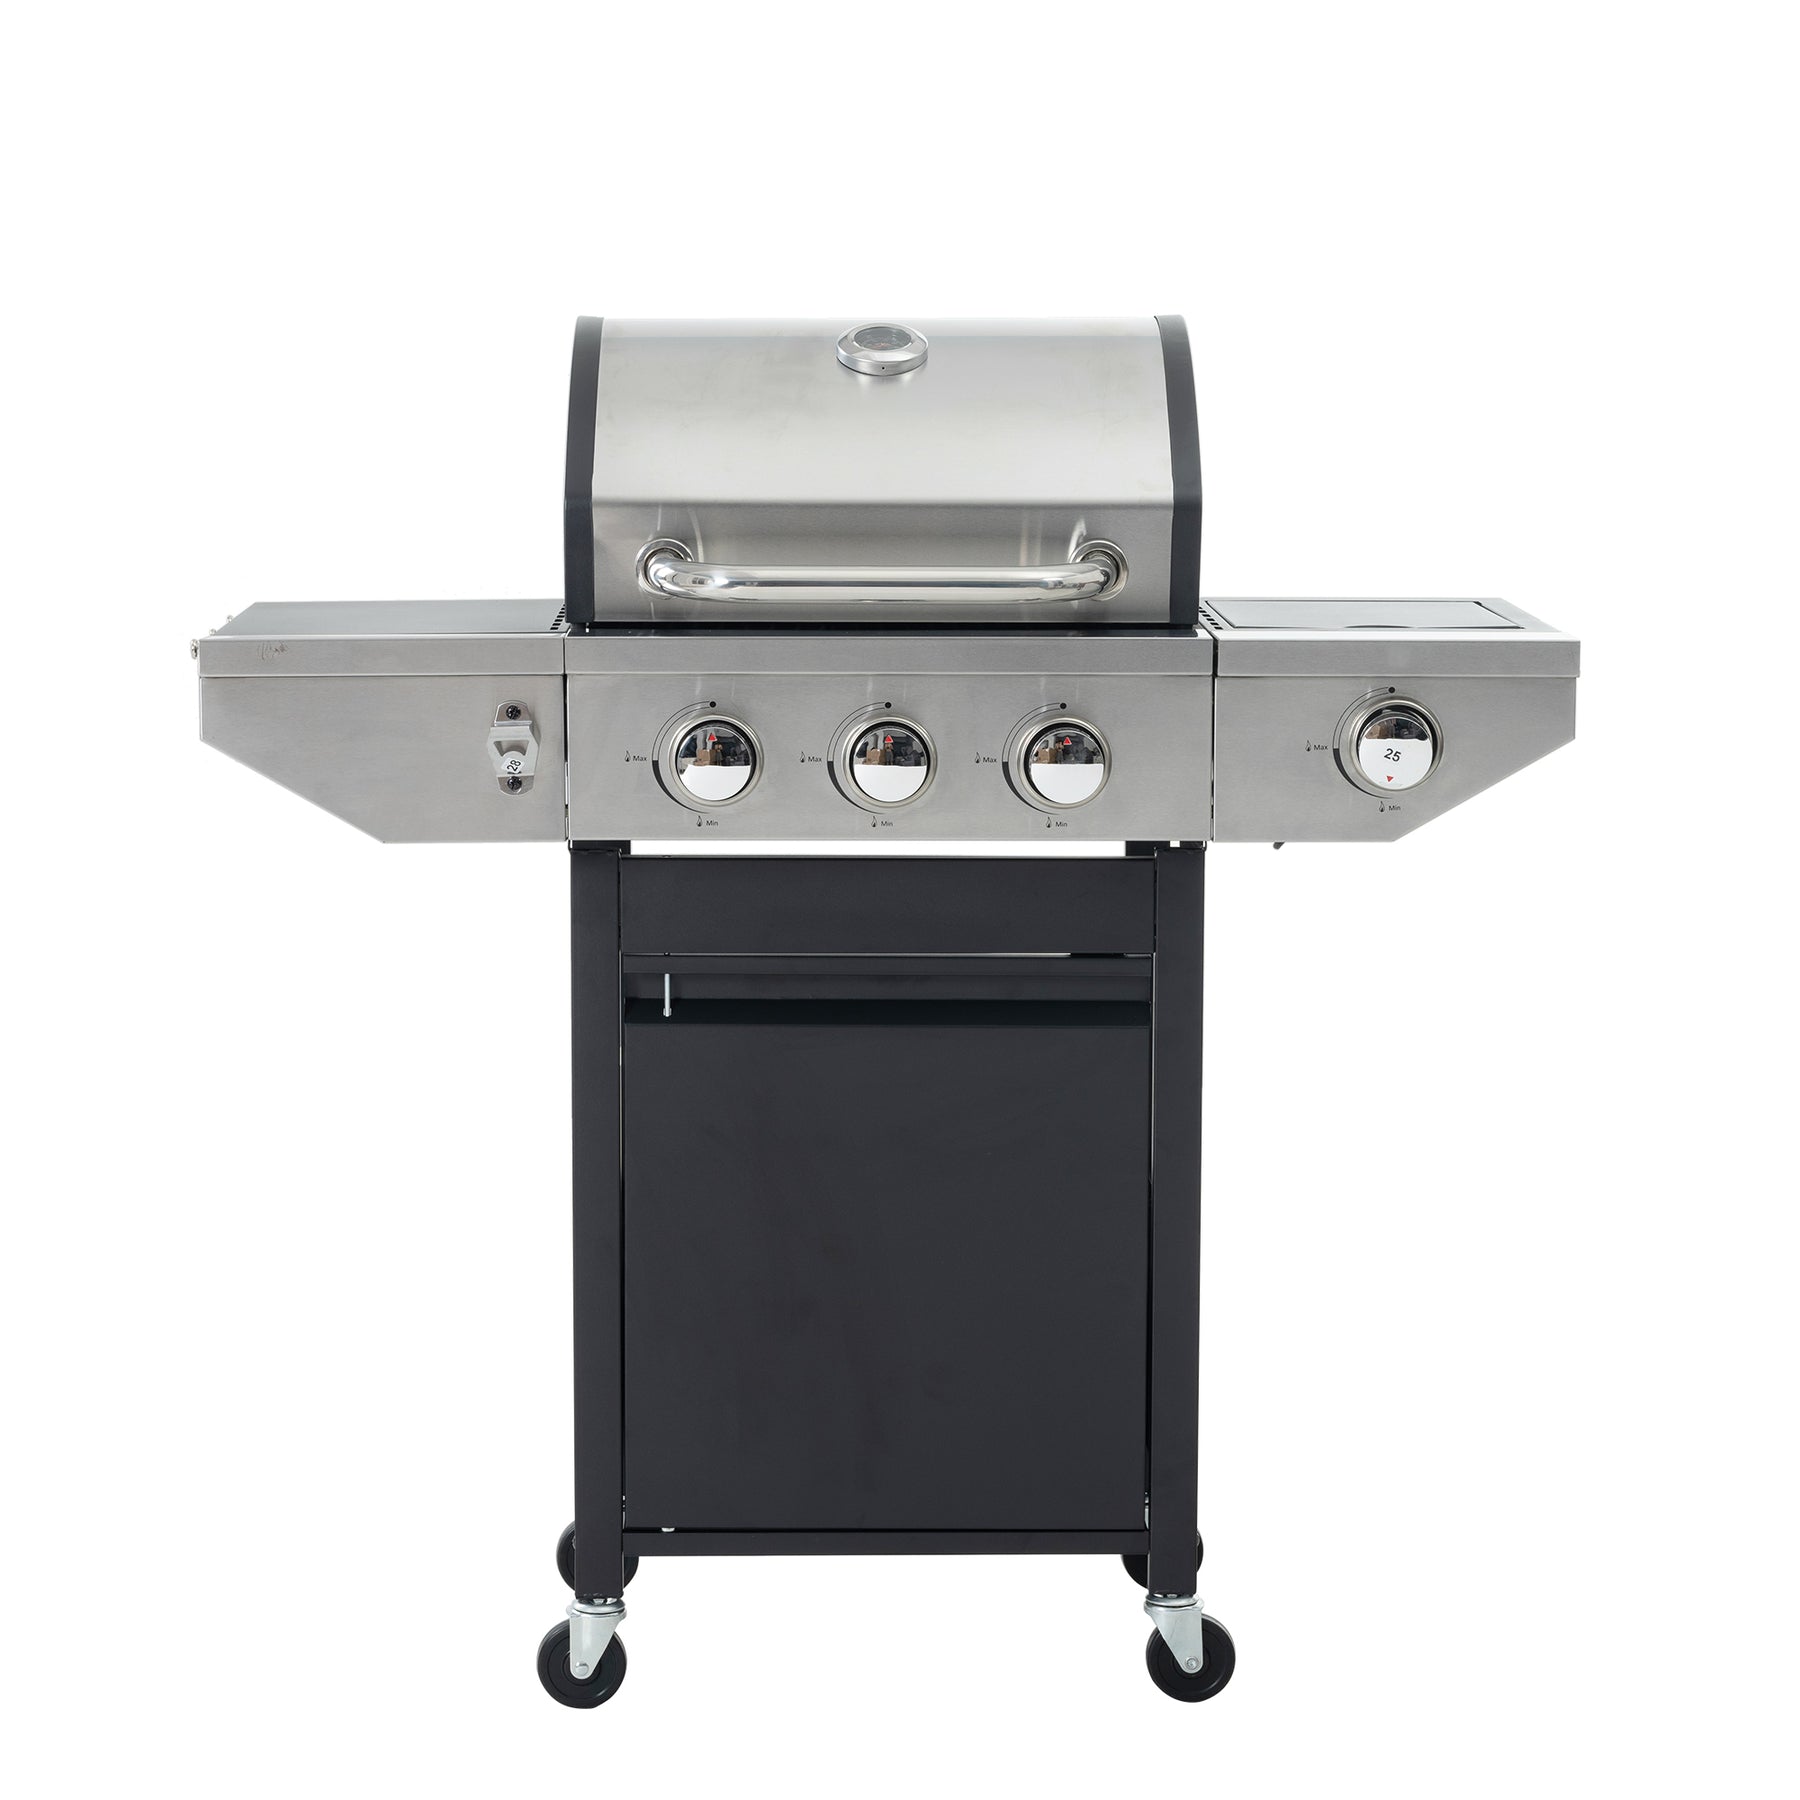 Propane Grill 3 Burner Barbecue Grill Stainless Steel Gas Grill with Side Burner and Thermometer for Outdoor BBQ, Camping - Tonkn